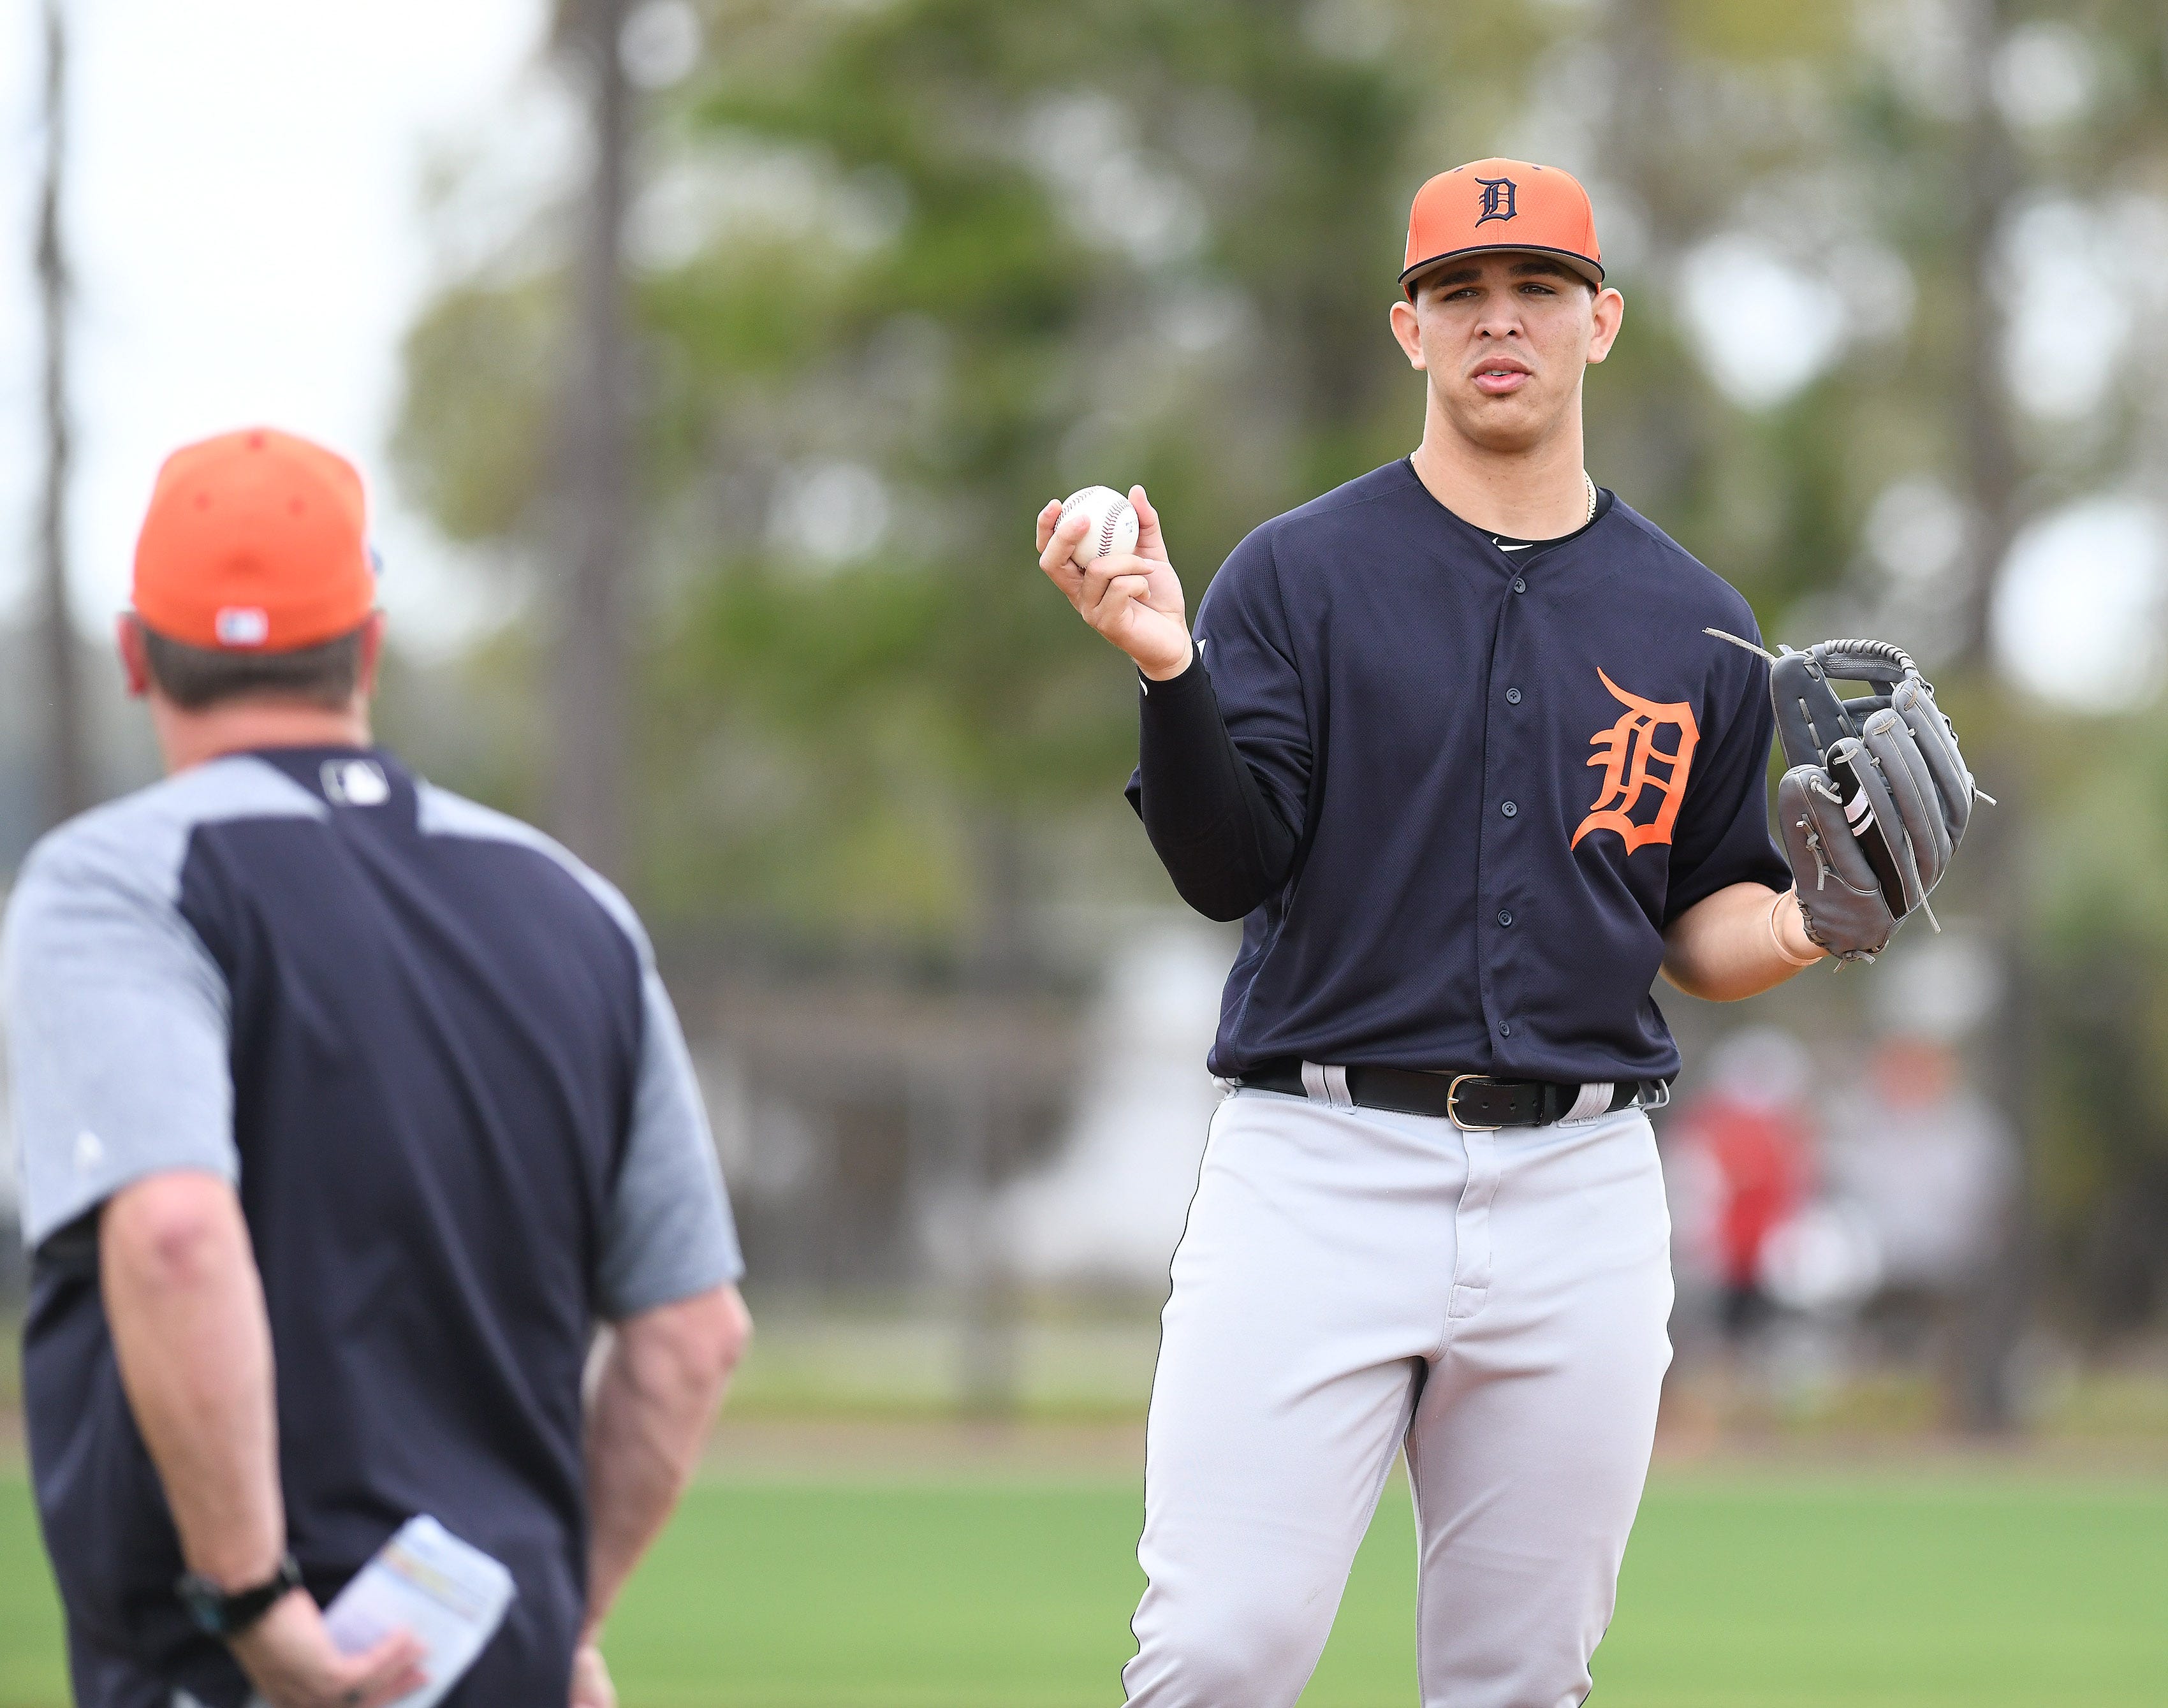 11. Franklin Perez, 22, 6-3, 197, RH starter: A couple of years ago, Perez was numero uno on Tigers prospects report cards. The top prize from Detroit’s deal that sent Justin Verlander to Houston in 2017, he already had shown during time on the Astros farm that Perez was headed for big-league glitter – a solid, mid-rotation (at least) plowhorse who could work innings and torment hitters. And then a man who hadn’t had any serious ills with the Astros ran into bad times with the Tigers, capped by last year’s LAT issues that knocked out most of 2019 and haven’t yet eased fully. The Tigers won’t concede. Not yet. And while it is getting late, even at 22, should Perez bump into his old form and power, the Tigers will reclaim a man talented enough to be that rotation big boy everyone thought they had snagged in 2017.